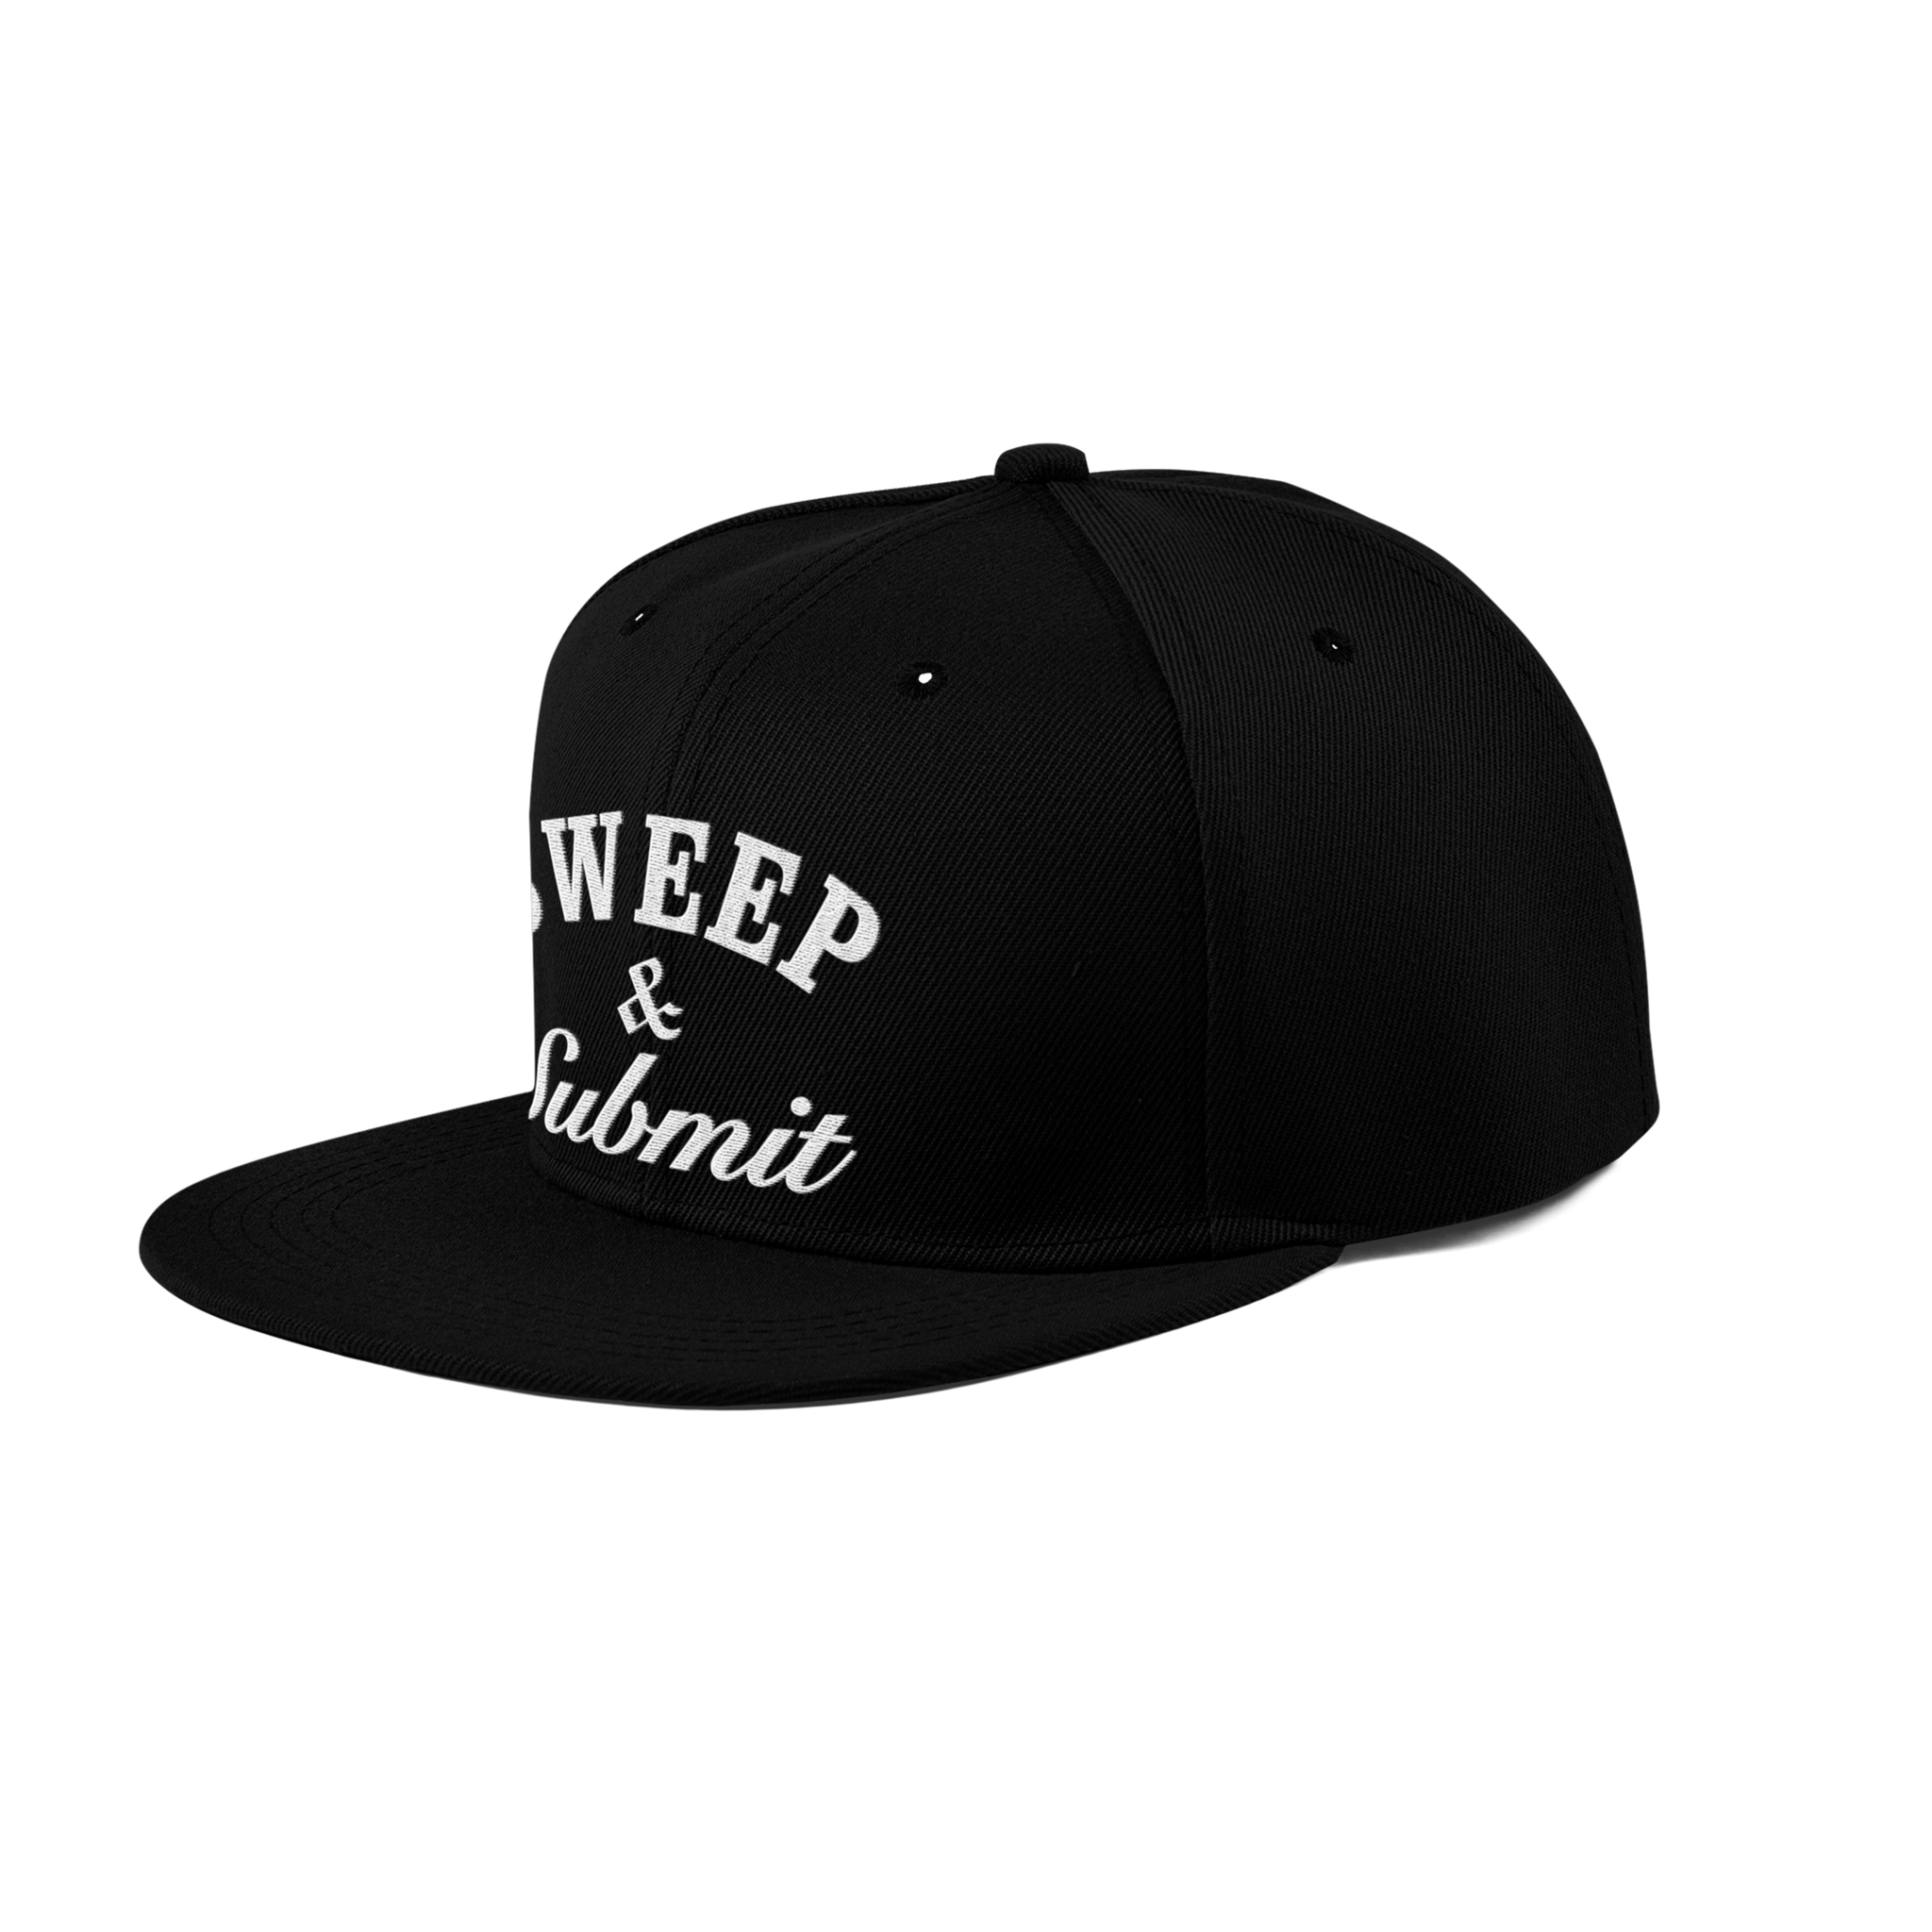 Sweep & Submit Hat Black